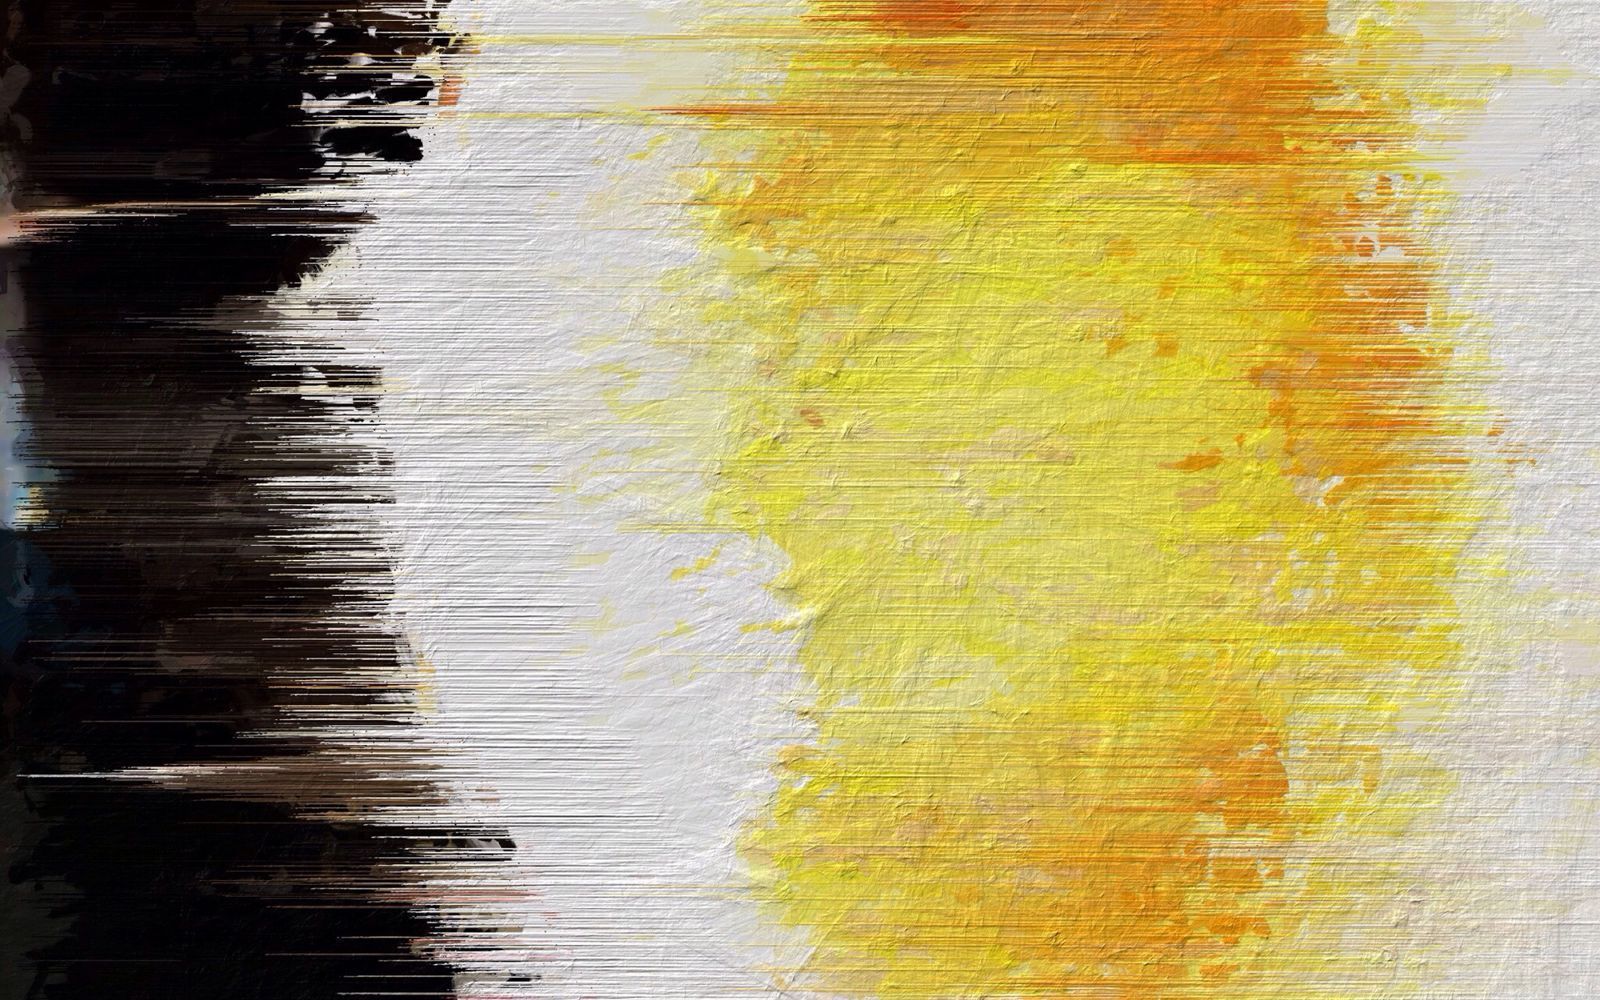 Black White Yellow Painted Brushed Design Cover Photo Wallpaper ...